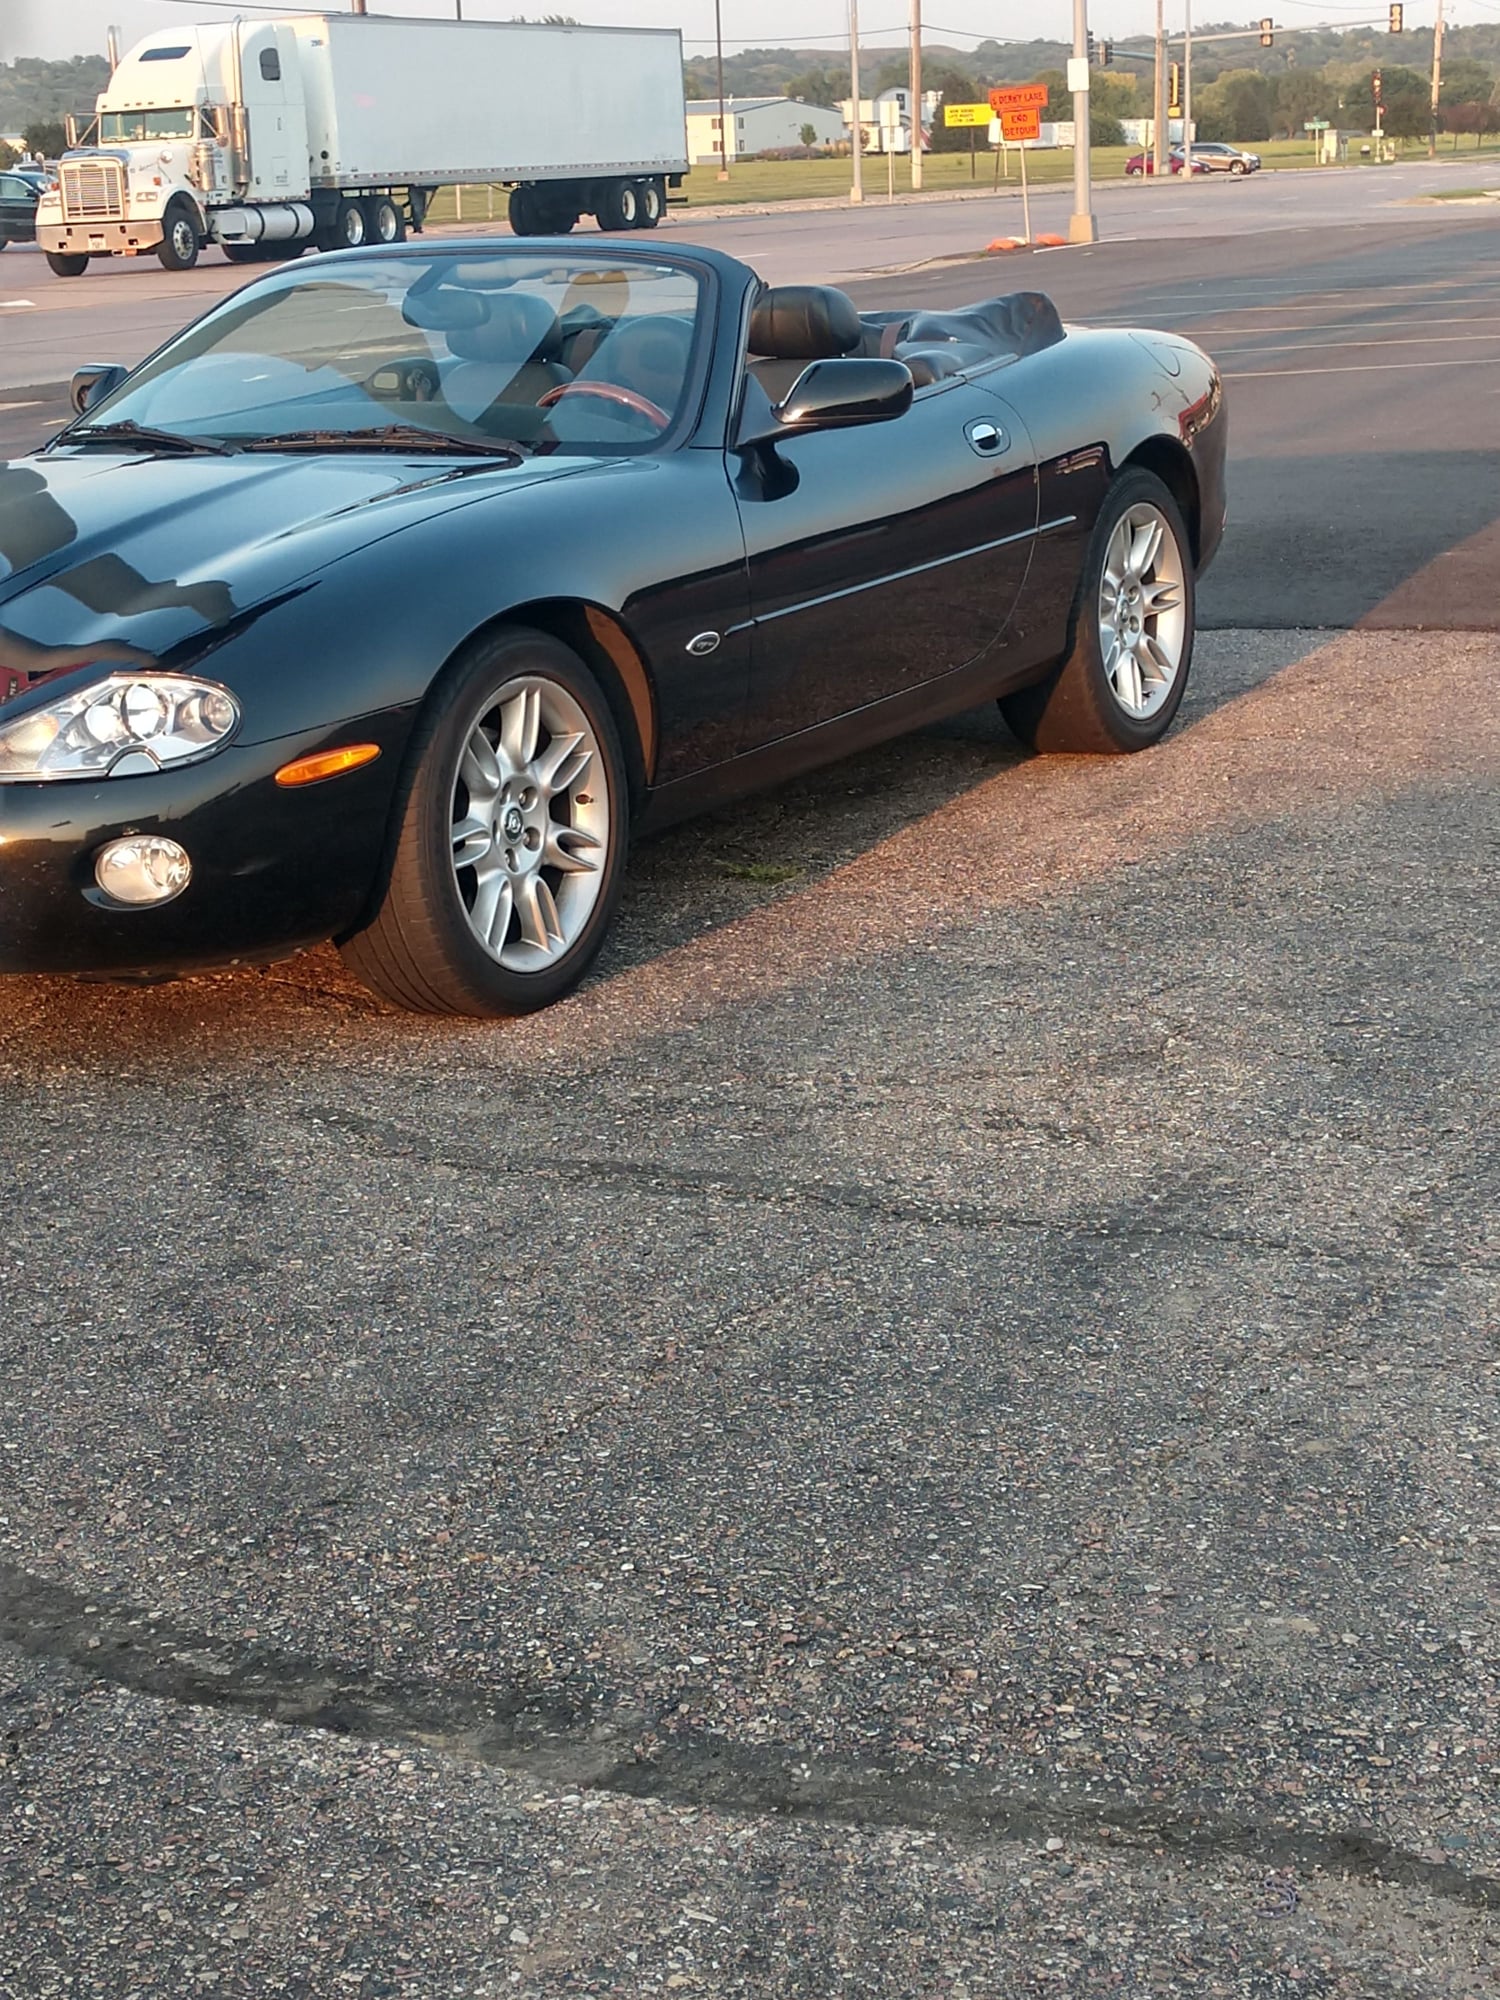 2002 Jaguar XK8 - Project Car - Used - VIN SAJDA42C92NA25731 - 127,000 Miles - 8 cyl - Convertible - Black - Sioux City, IA 51106, United States